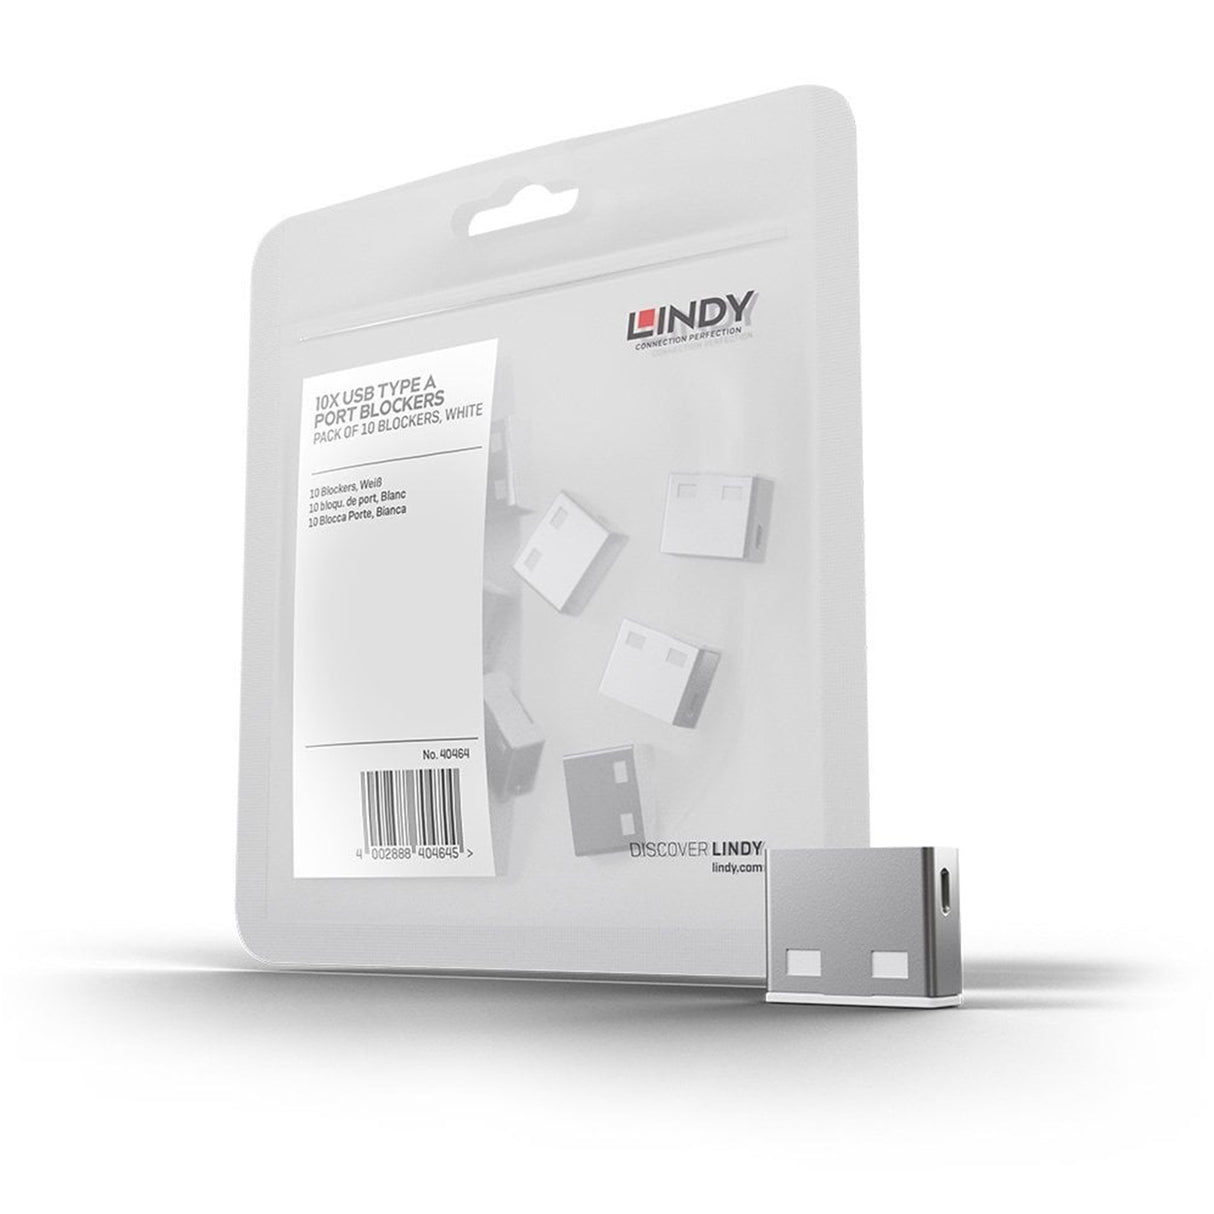 LINDY 40464 USB Port Blocker, Pack of 10, Key Not Included, USB Type-A Compatible, Colour Code: White, Physically Prevent Access to a USB-A Port, Quick and Simple to Use, Retail Polybag Packaging